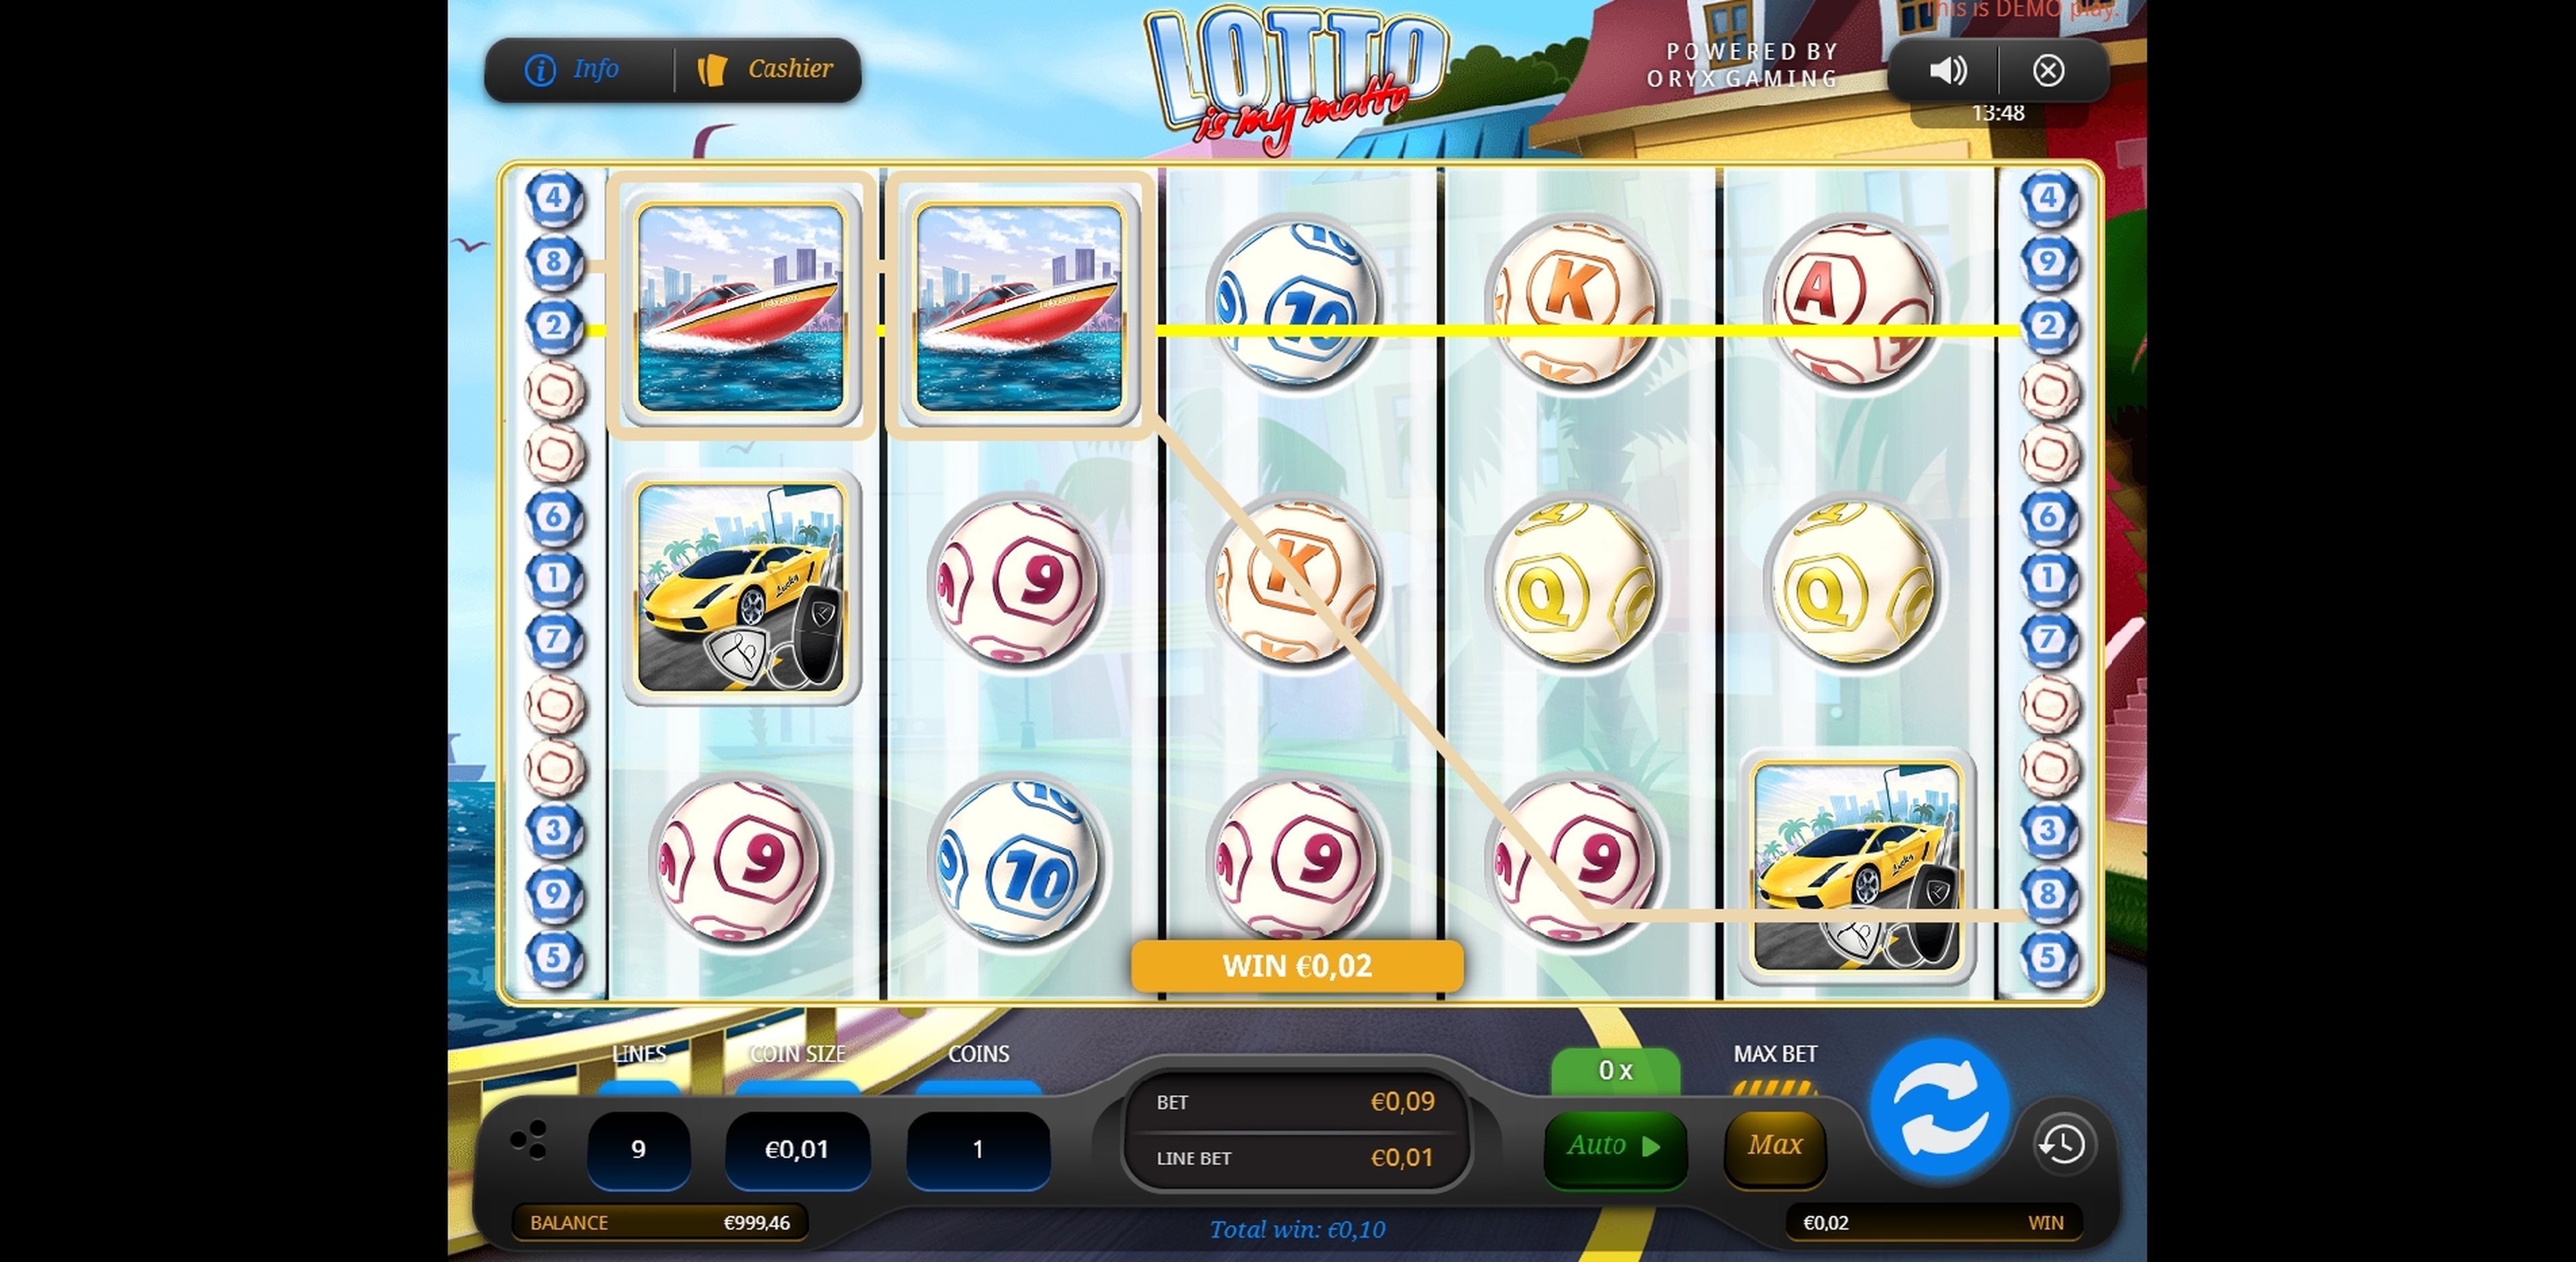 Win Money in Lotto is My Motto Free Slot Game by Oryx Gaming